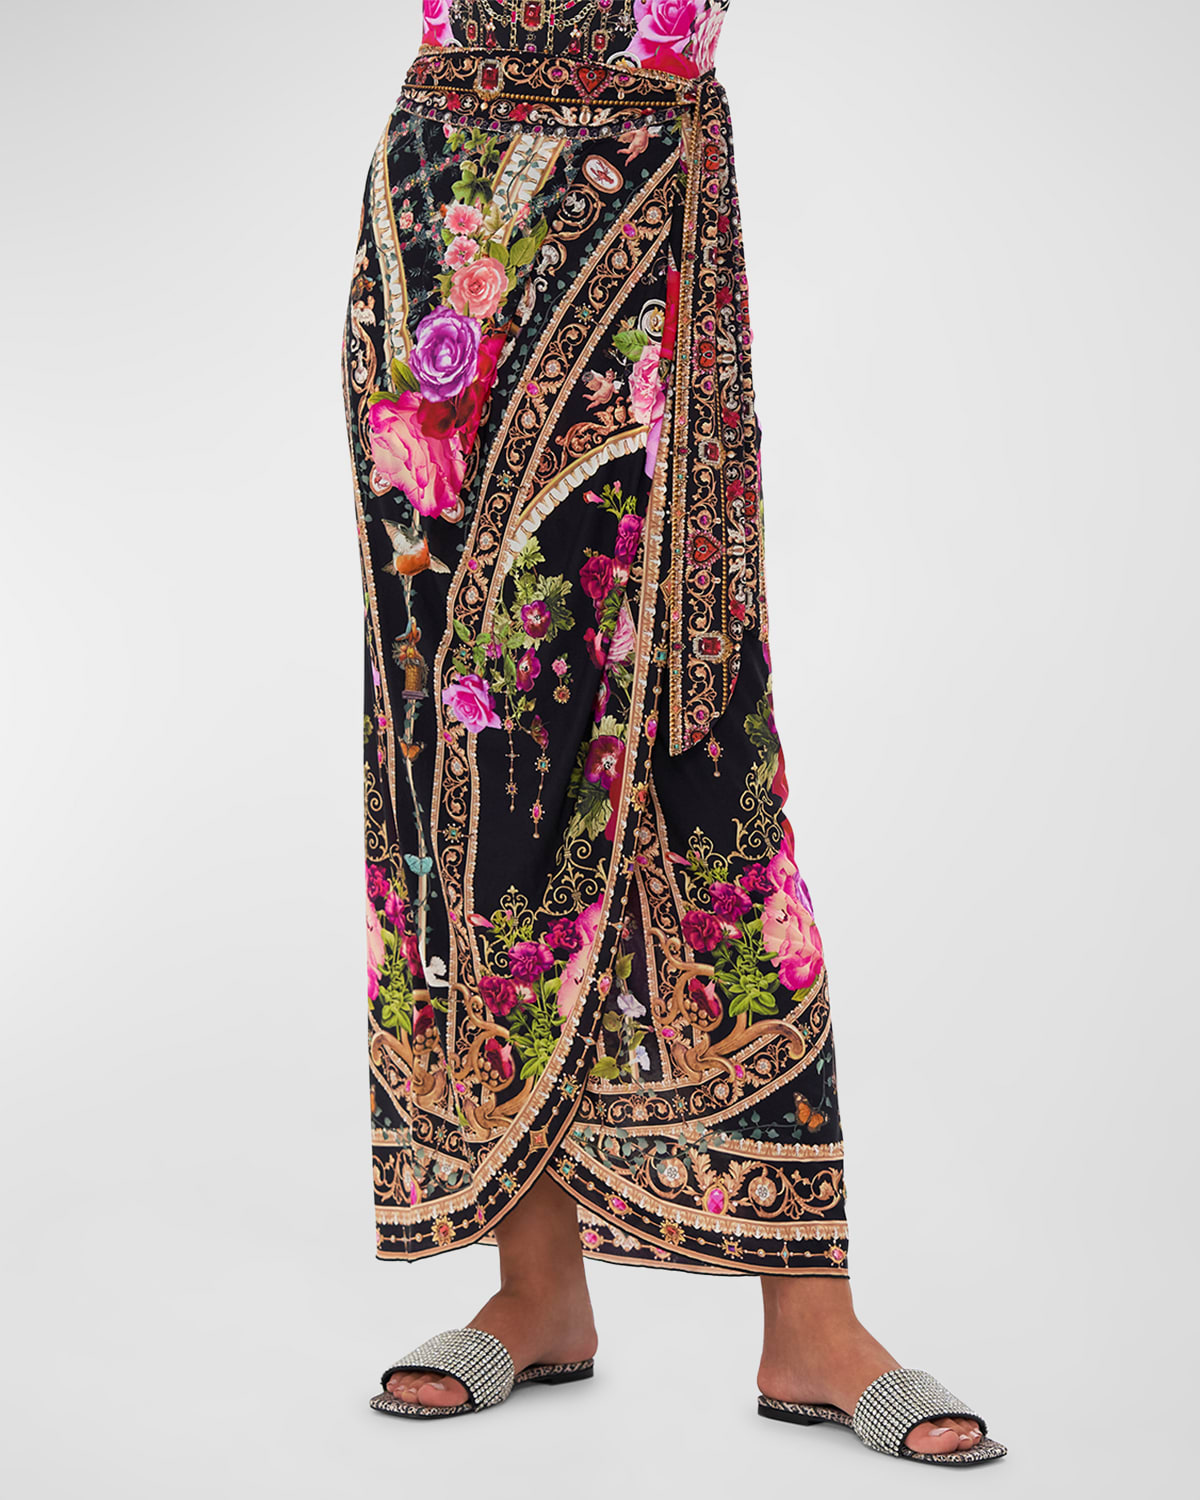 Reservation For Love Draped Long Sarong Coverup